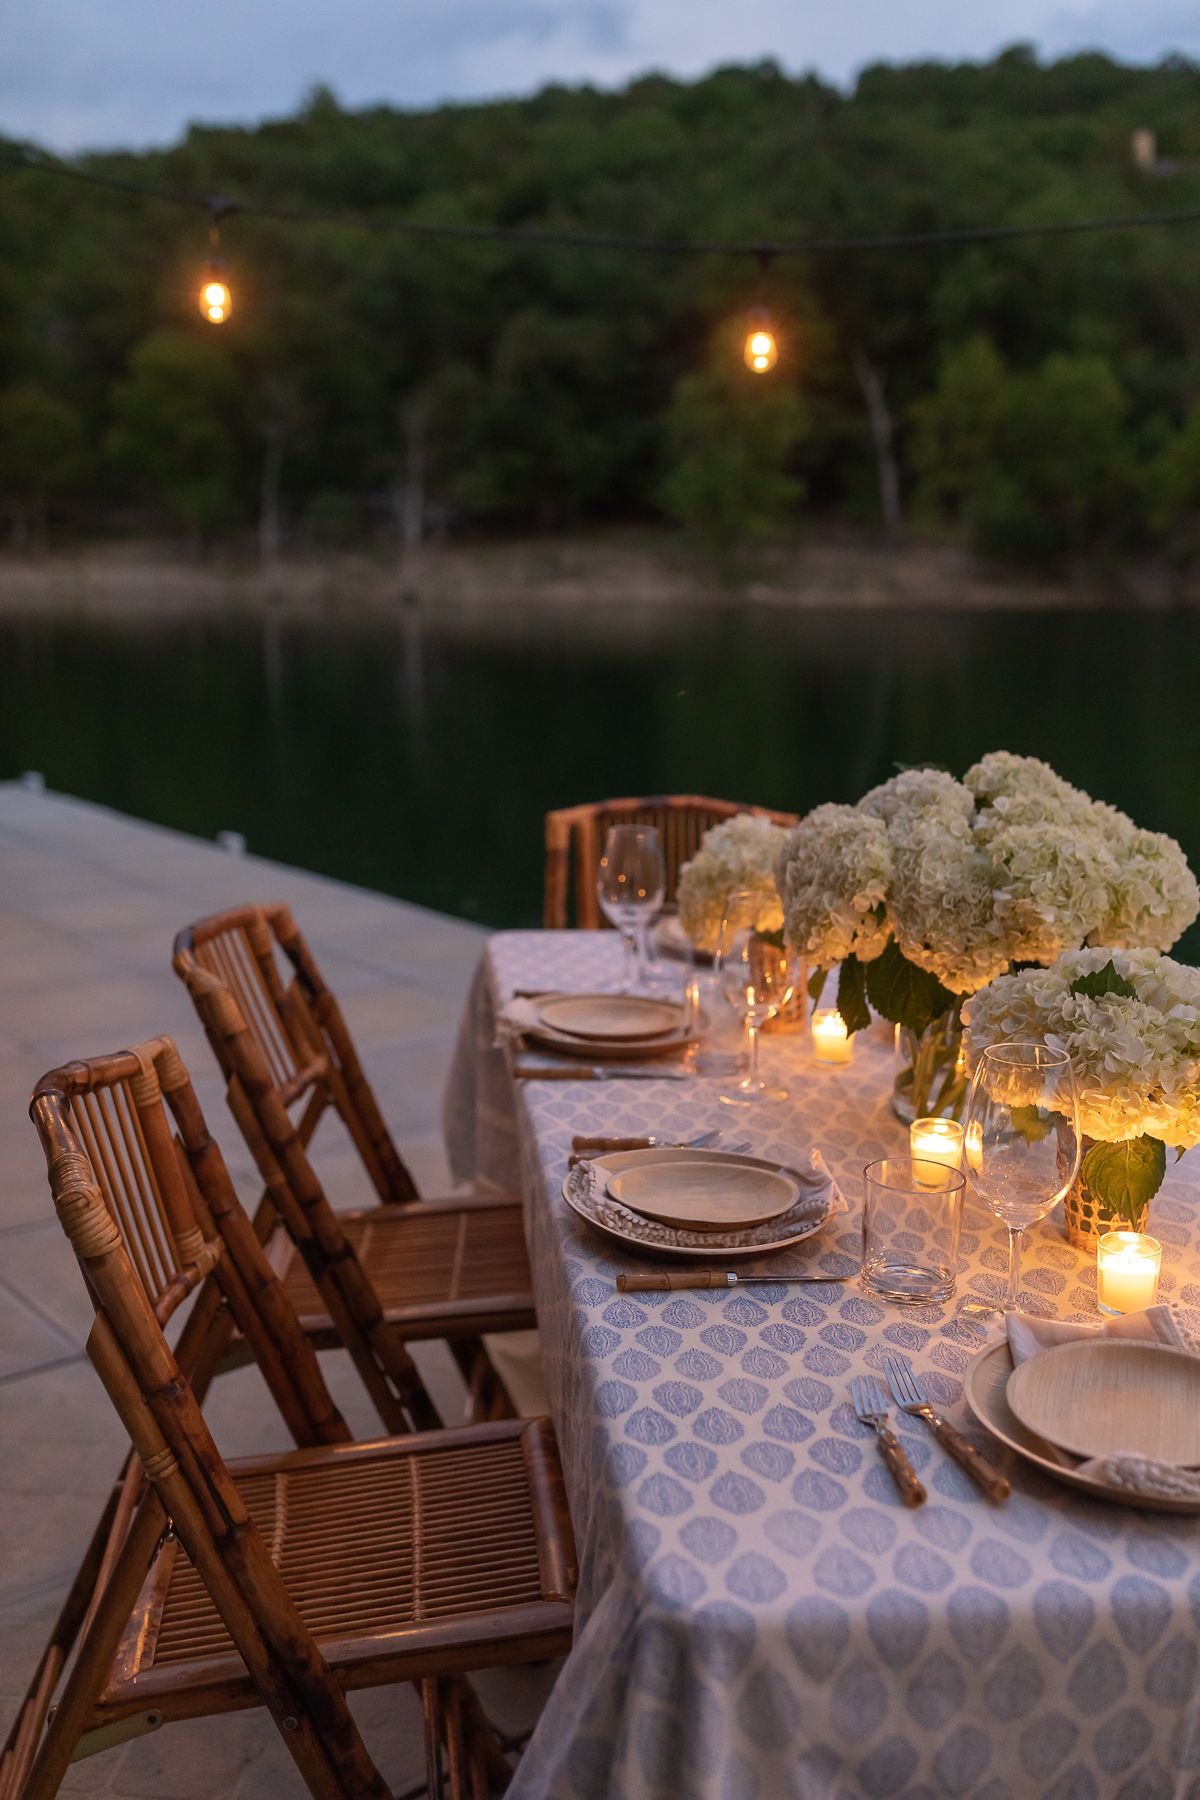 An outdoor dining table set up with string lights above